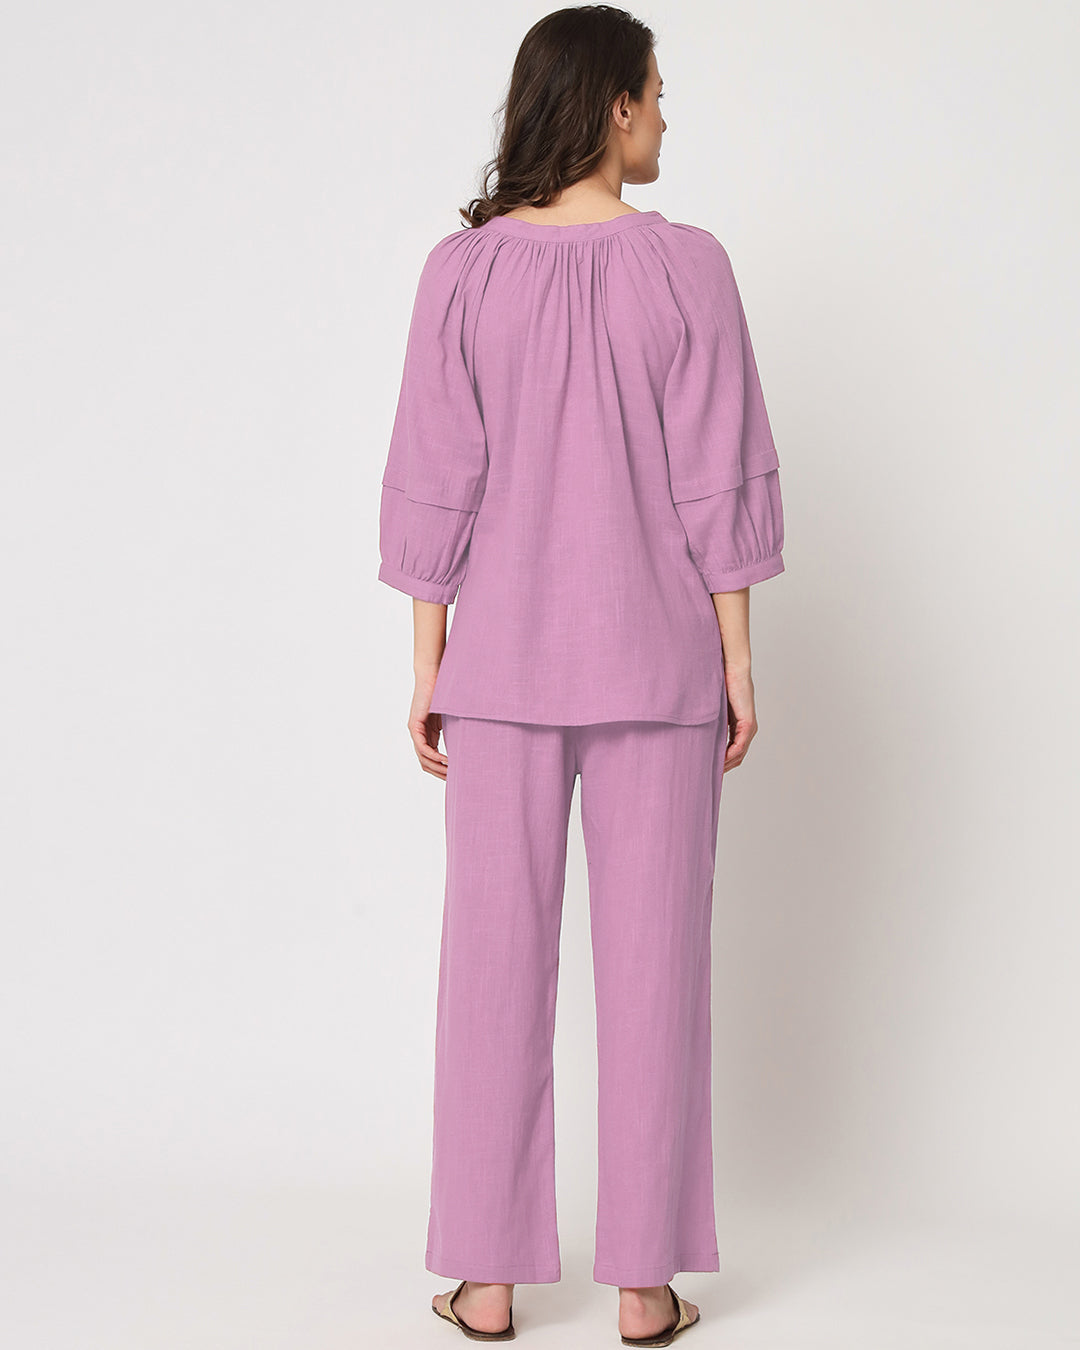 Iris Pink Button Neck Solid Top (Without Bottoms)